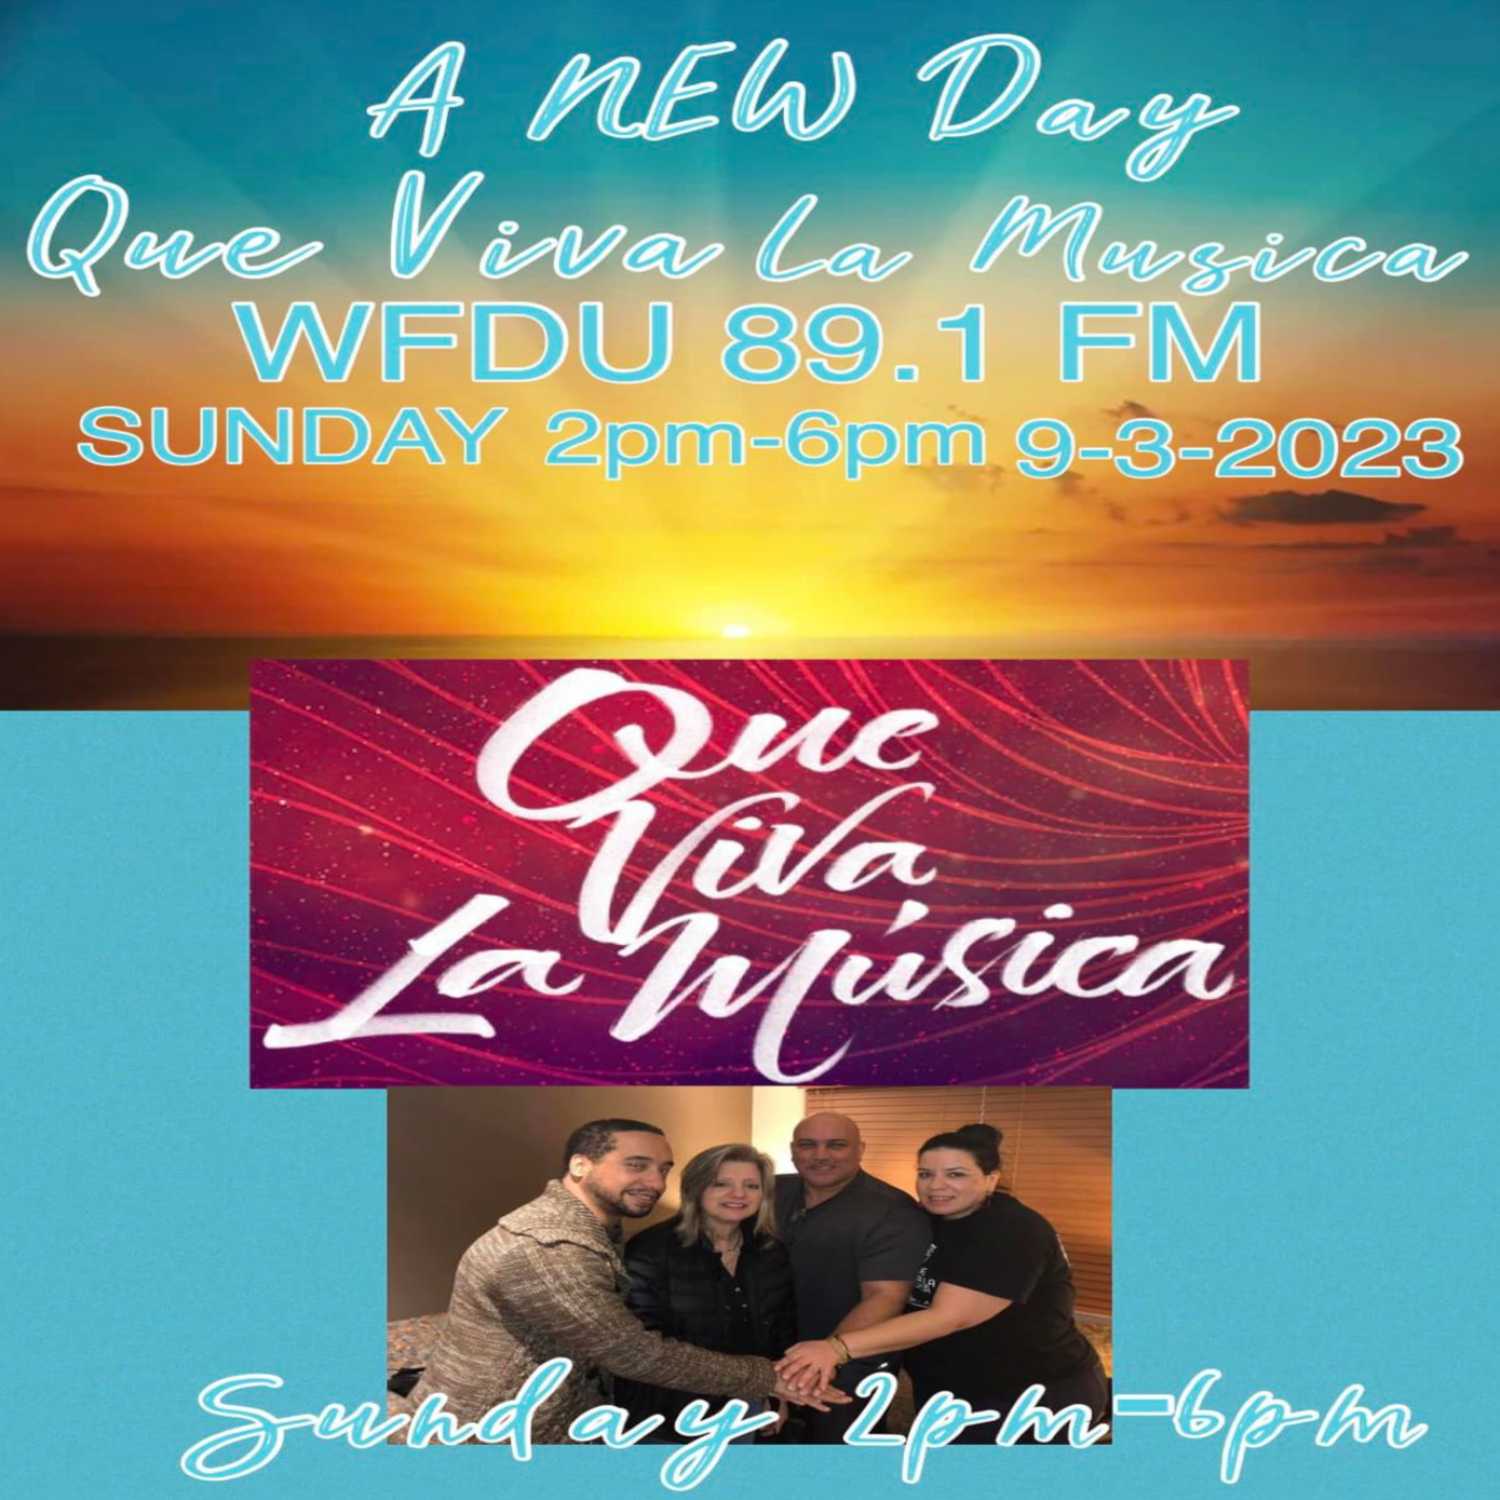 QVLM - 1st Show on Sundays - 9-3-23- Produced by King Louis Vazquez